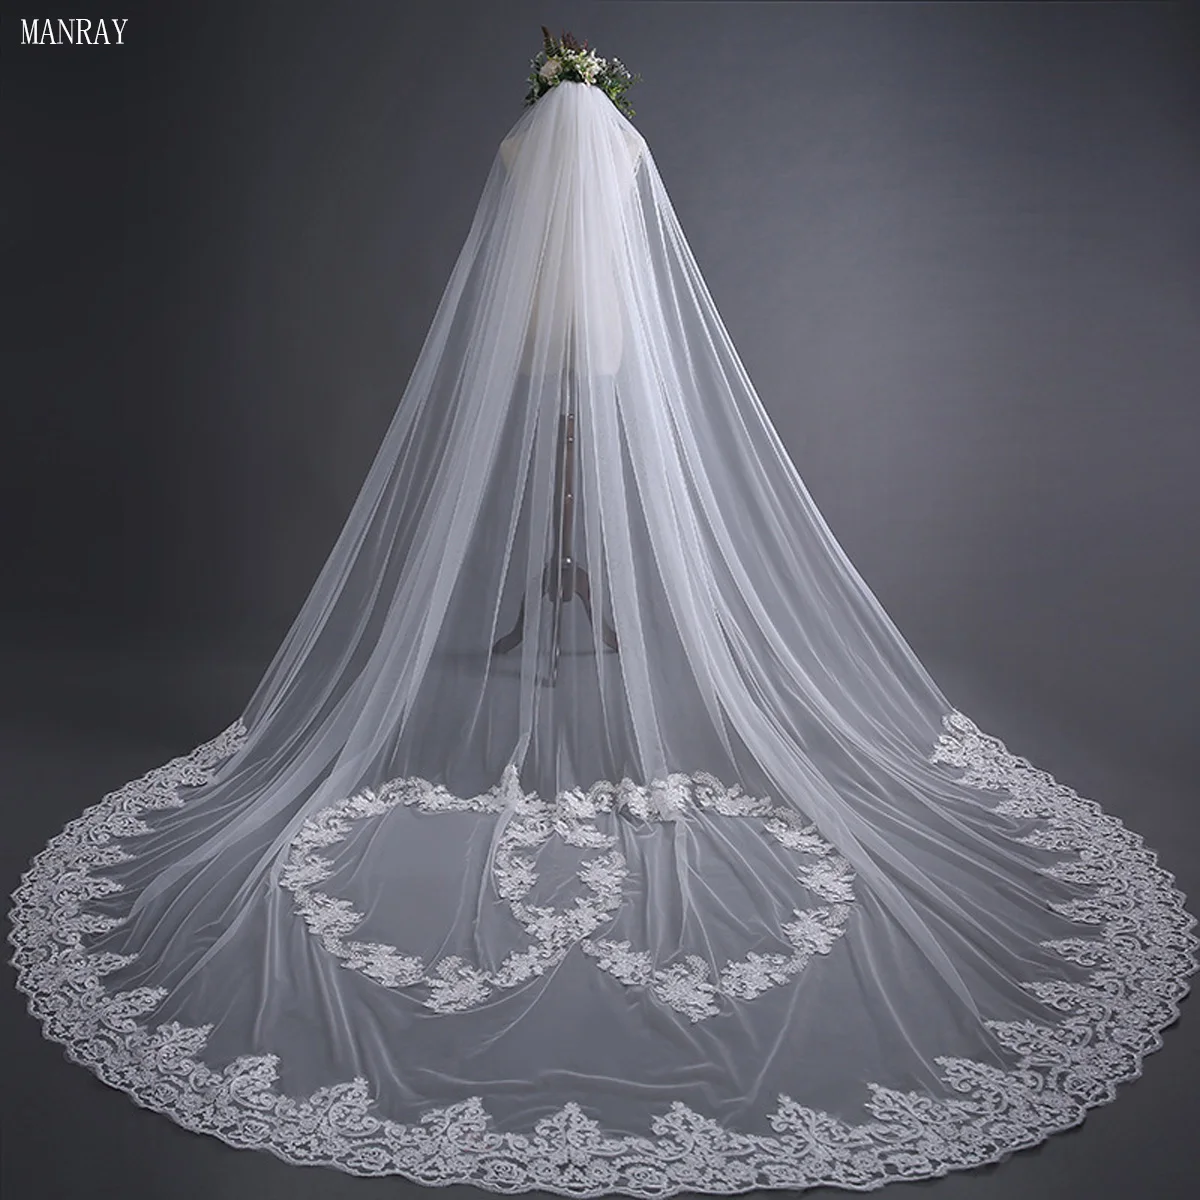 

MANRAY 3 Meters 1 Tier Veil Long Cathedral With Comb Lace Floral Applique Edge Fashion Wedding Veils Luxury Bridal Accessories